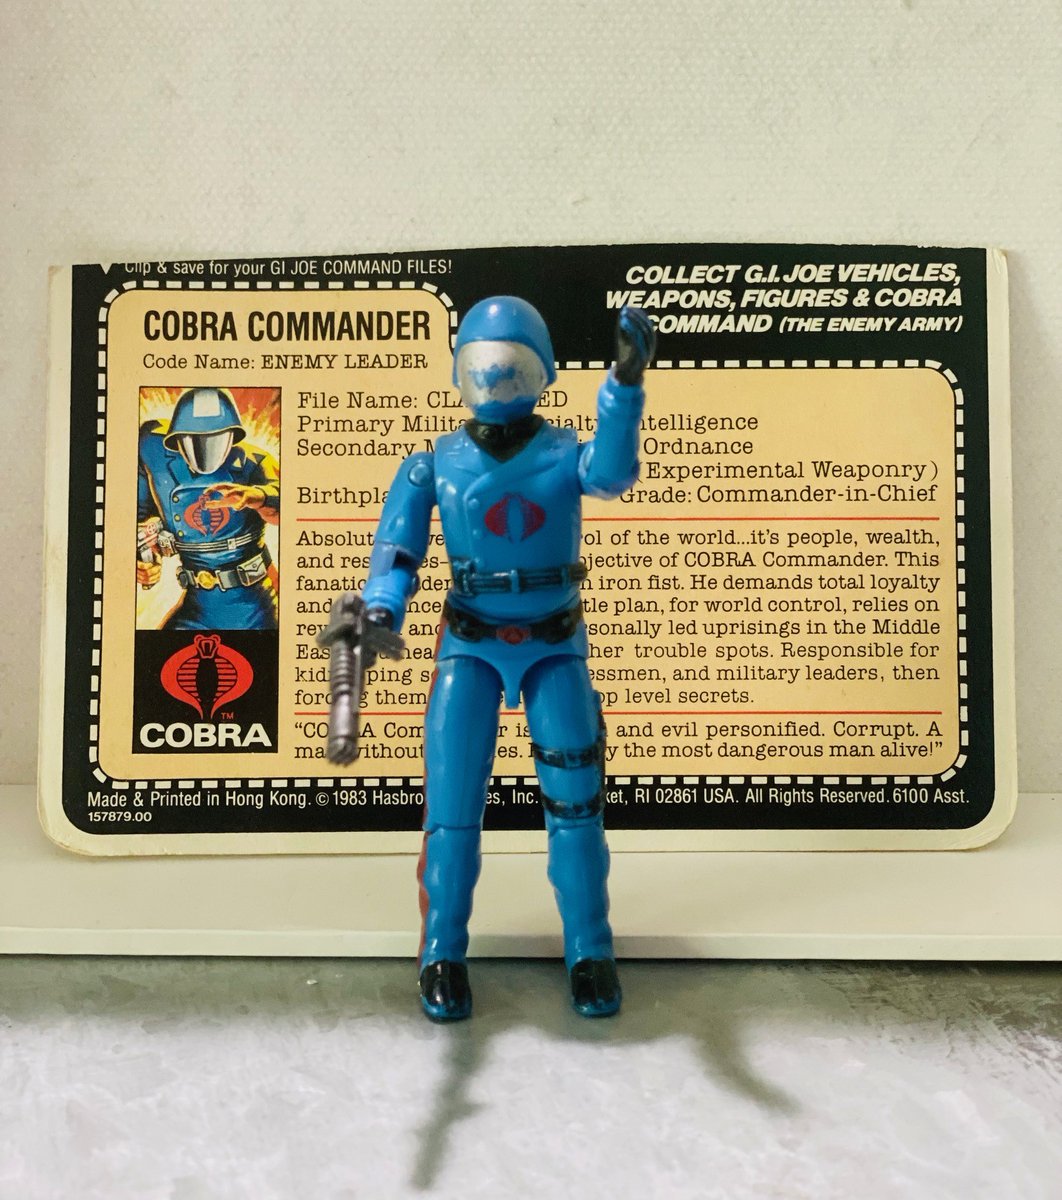 one of my few surviving figures from the 80s, CoCo finally got a file card.

#YoJoe #GIJoe #GIJoeNation #ToyCollector #GIJoePhotography #Nostalgia #ARAH #Cobra #GIJoeFigures #ActionFigure #80sToys #Collectibles #ToyPhotography #VintageToys